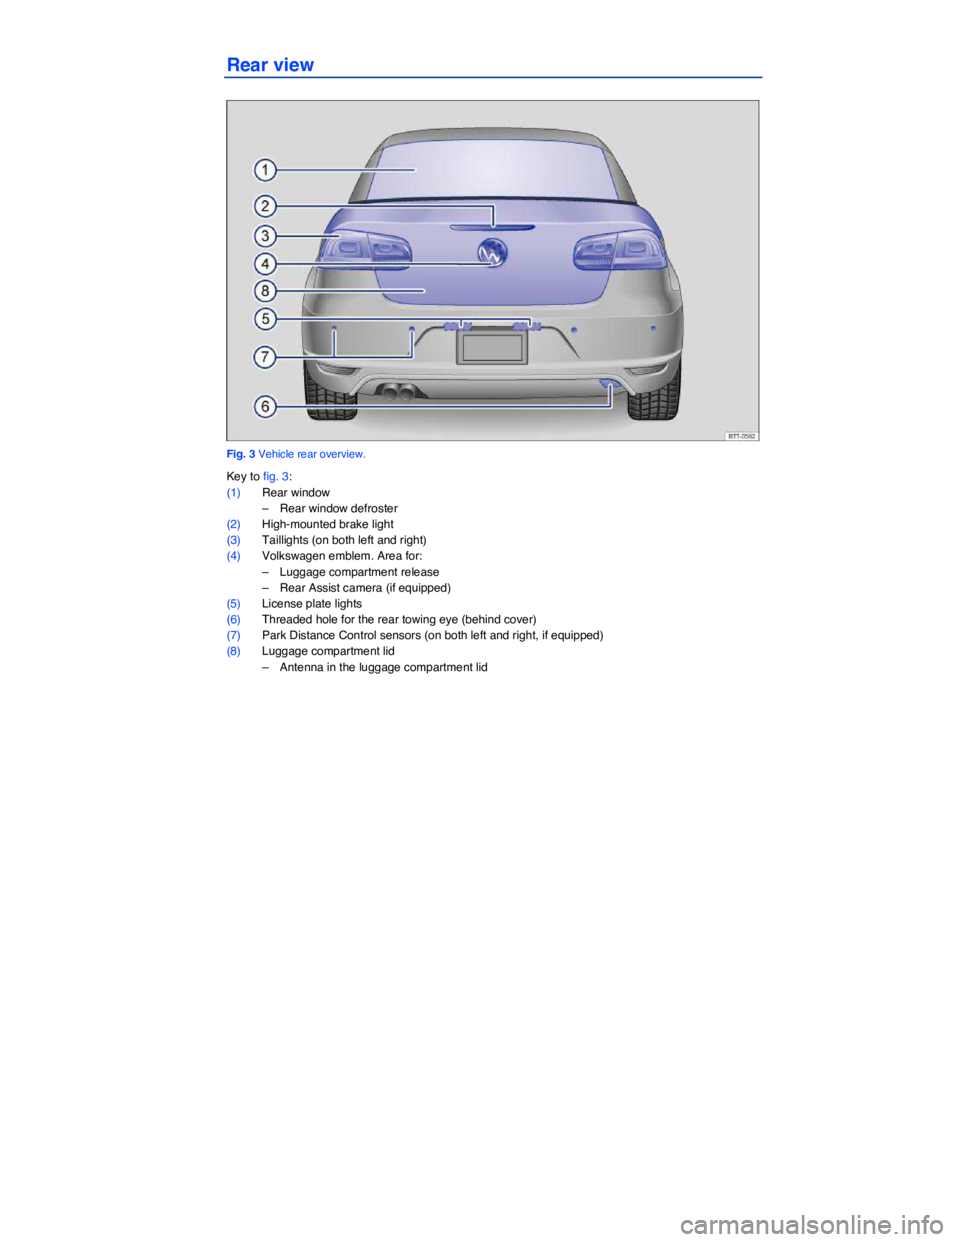 VOLKSWAGEN EOS 2008  Owners Manual  
 
Rear view 
 
Fig. 3 Vehicle rear overview. 
Key to fig. 3: 
(1) Rear window 
–  Rear window defroster  
(2) High-mounted brake light 
(3) Taillights (on both left and right)  
(4) Volkswagen emb